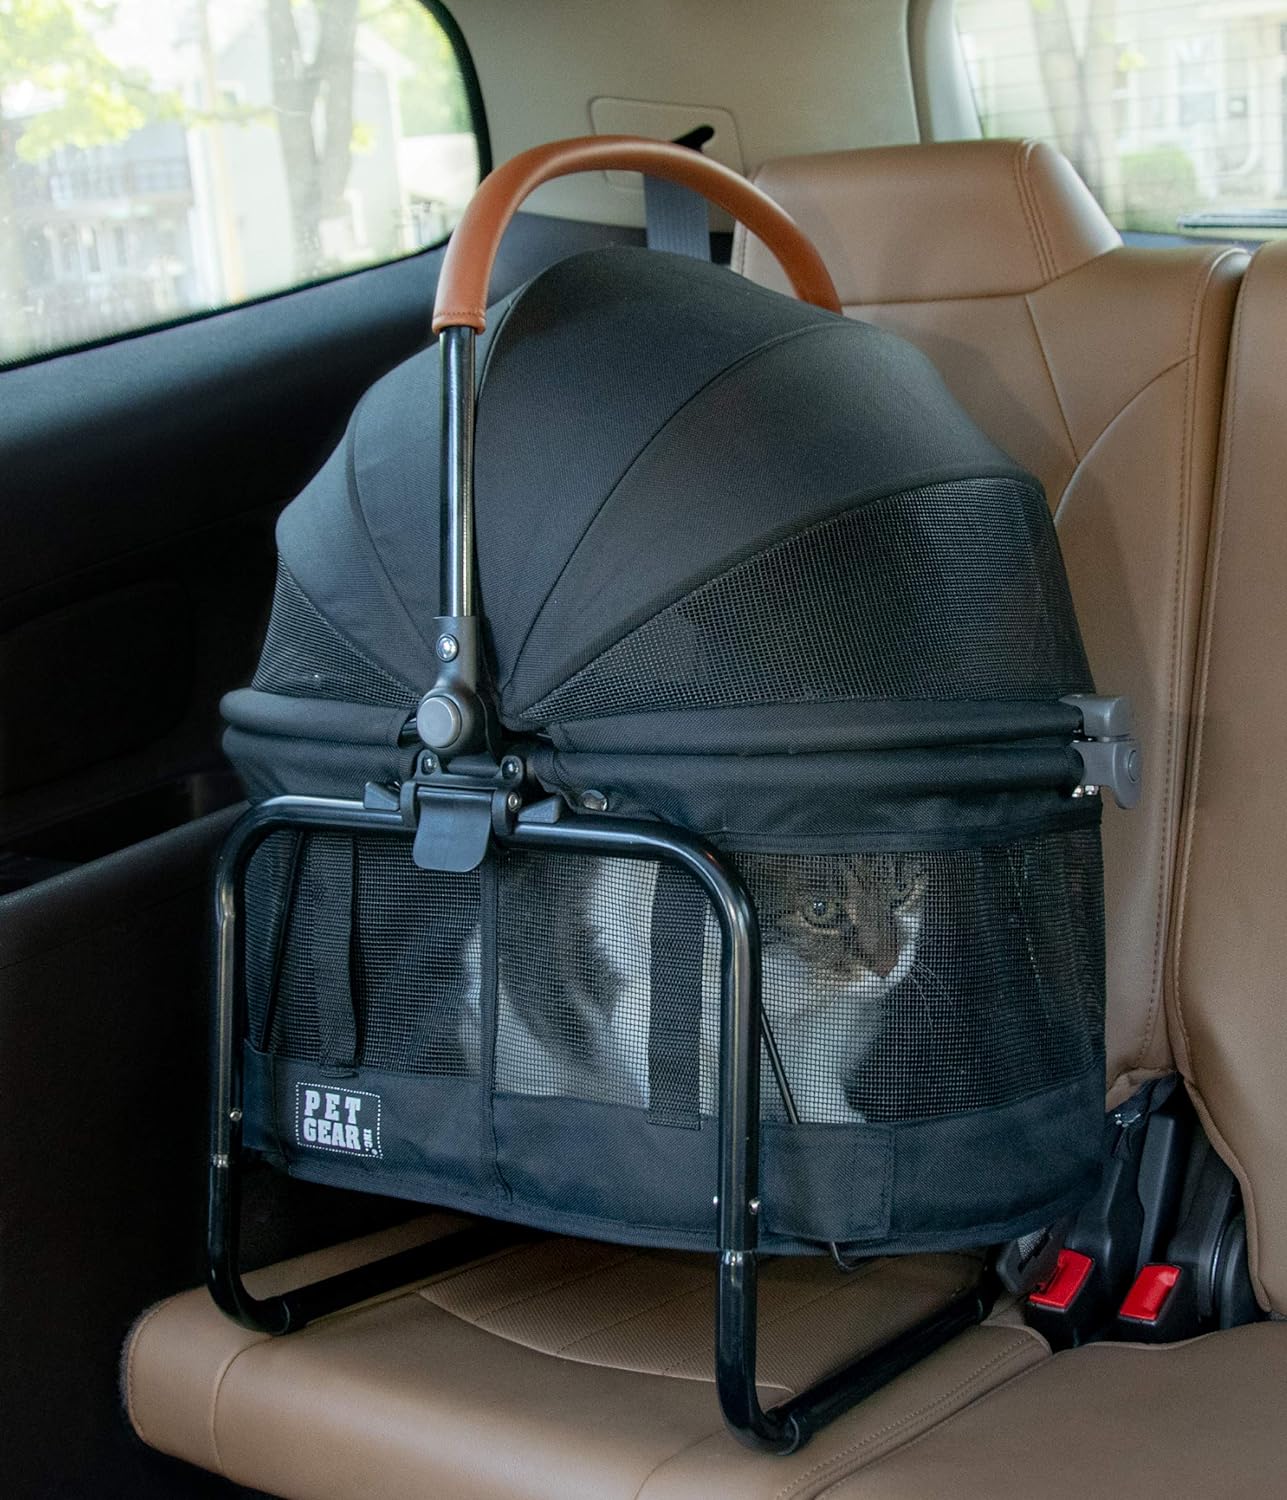 Pet Gear View 360 Pet Carrier & Car Seat with Booster Seat Frame for Small Dogs & Cats, Mesh Ventilation, Push Button Entry, No Tools Required, 4 Colors